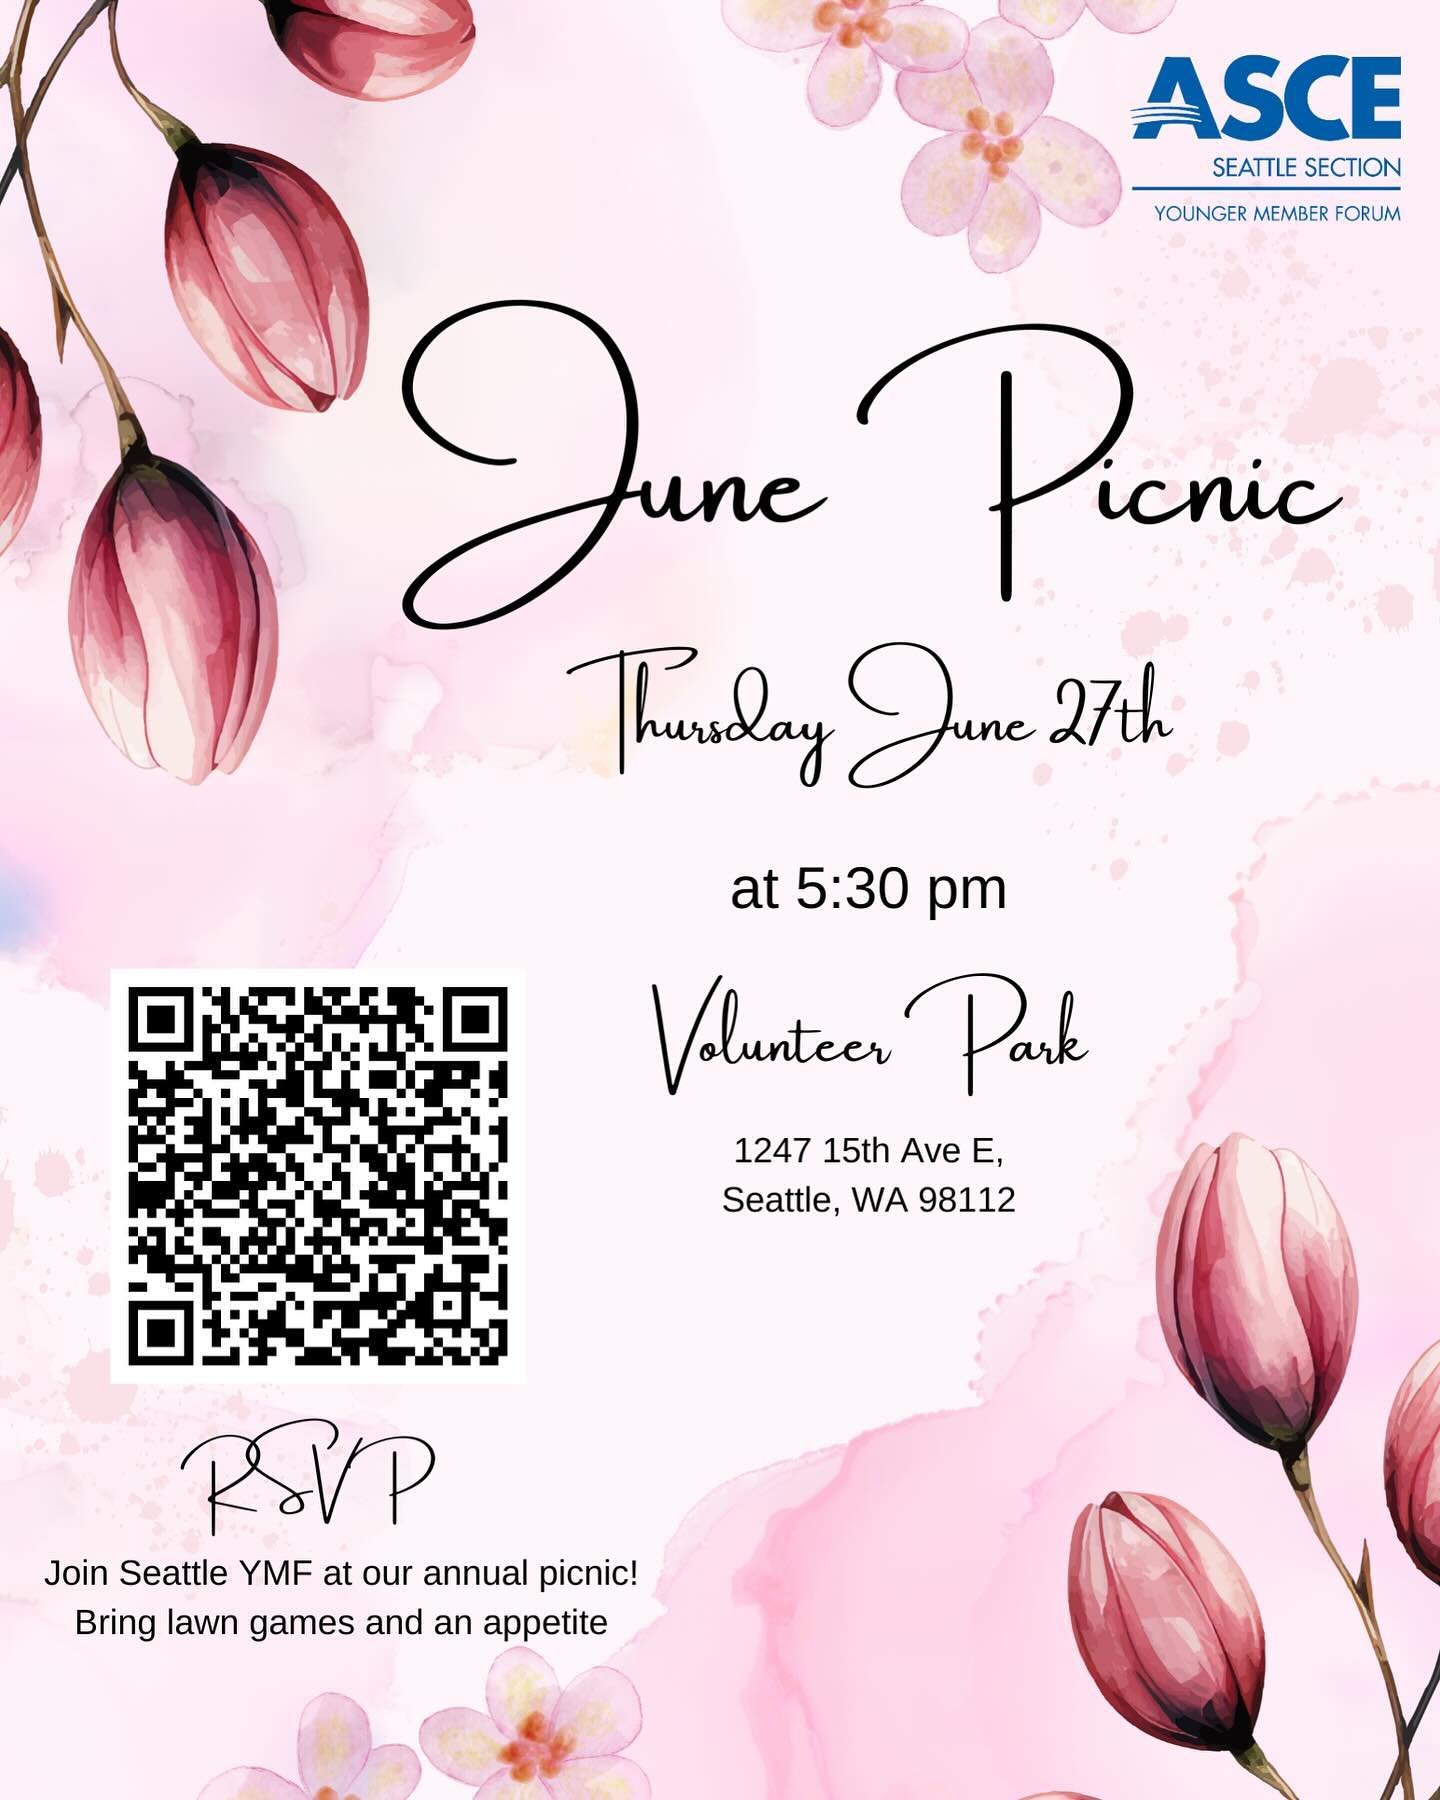 Please join us for our annual spring/summer picnic! We will be at Volunteer Park on June 27th at 5:30! Please bring lawn games and chairs! We will provide food! This is a great way to meet other Civil Engineers and kick off the summer months! Please 